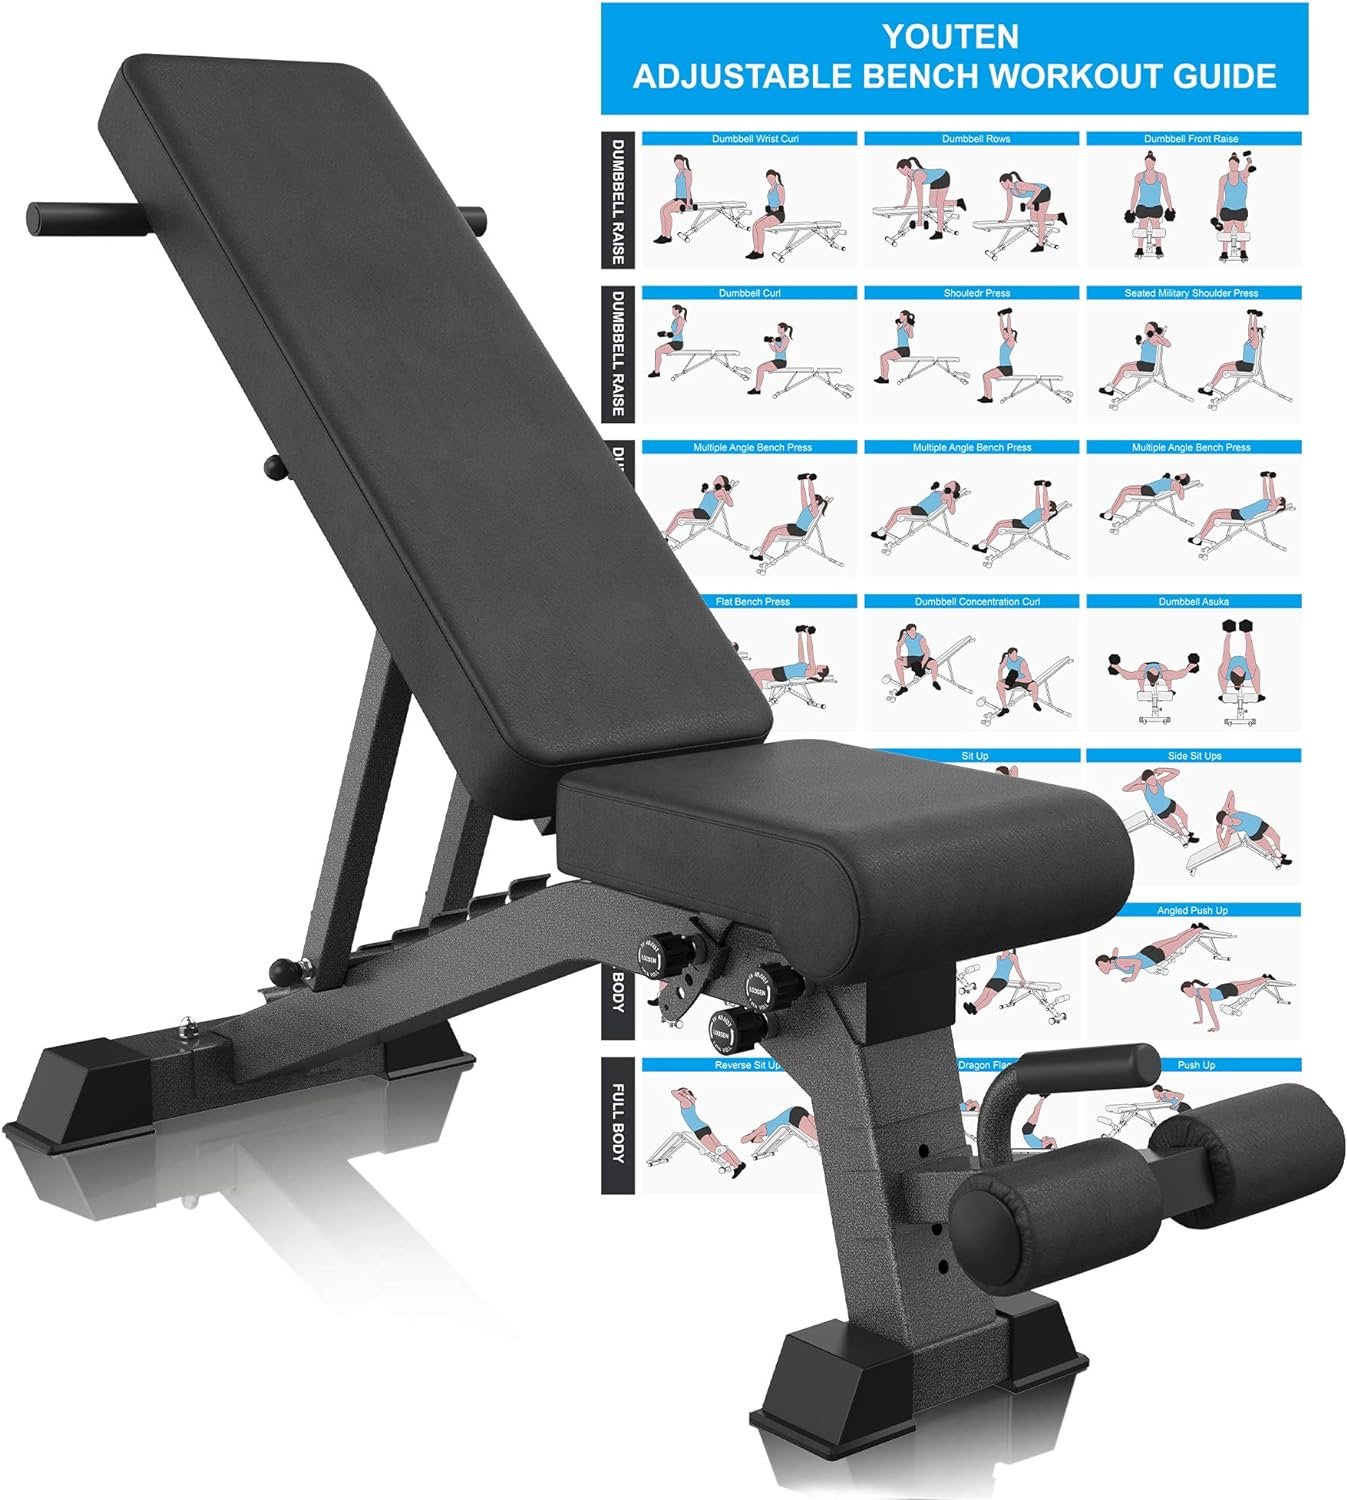 YOUTEN Weight Bench Review